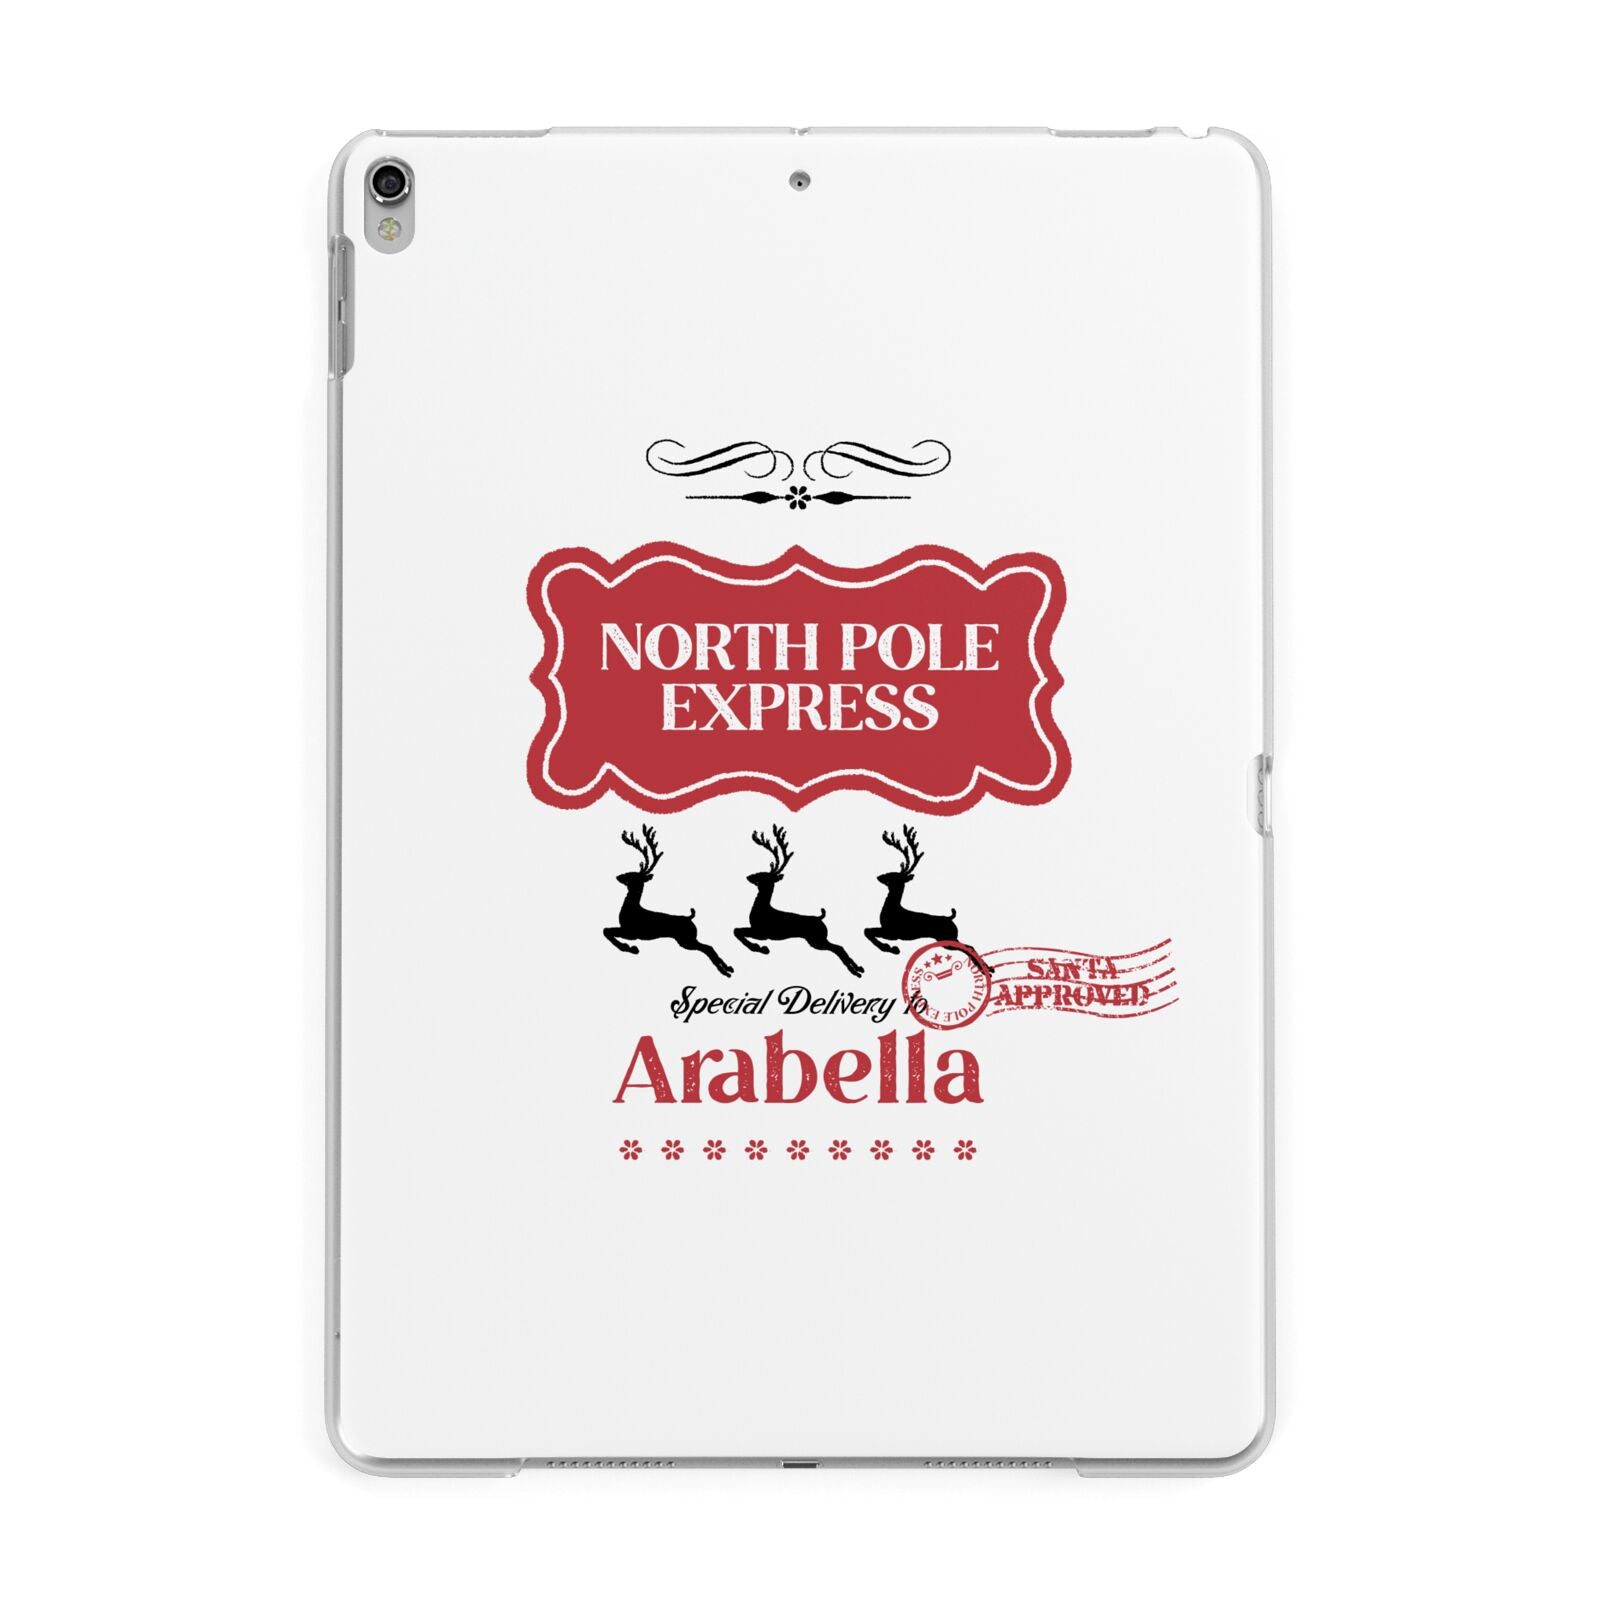 North Pole Express Personalised Apple iPad Silver Case